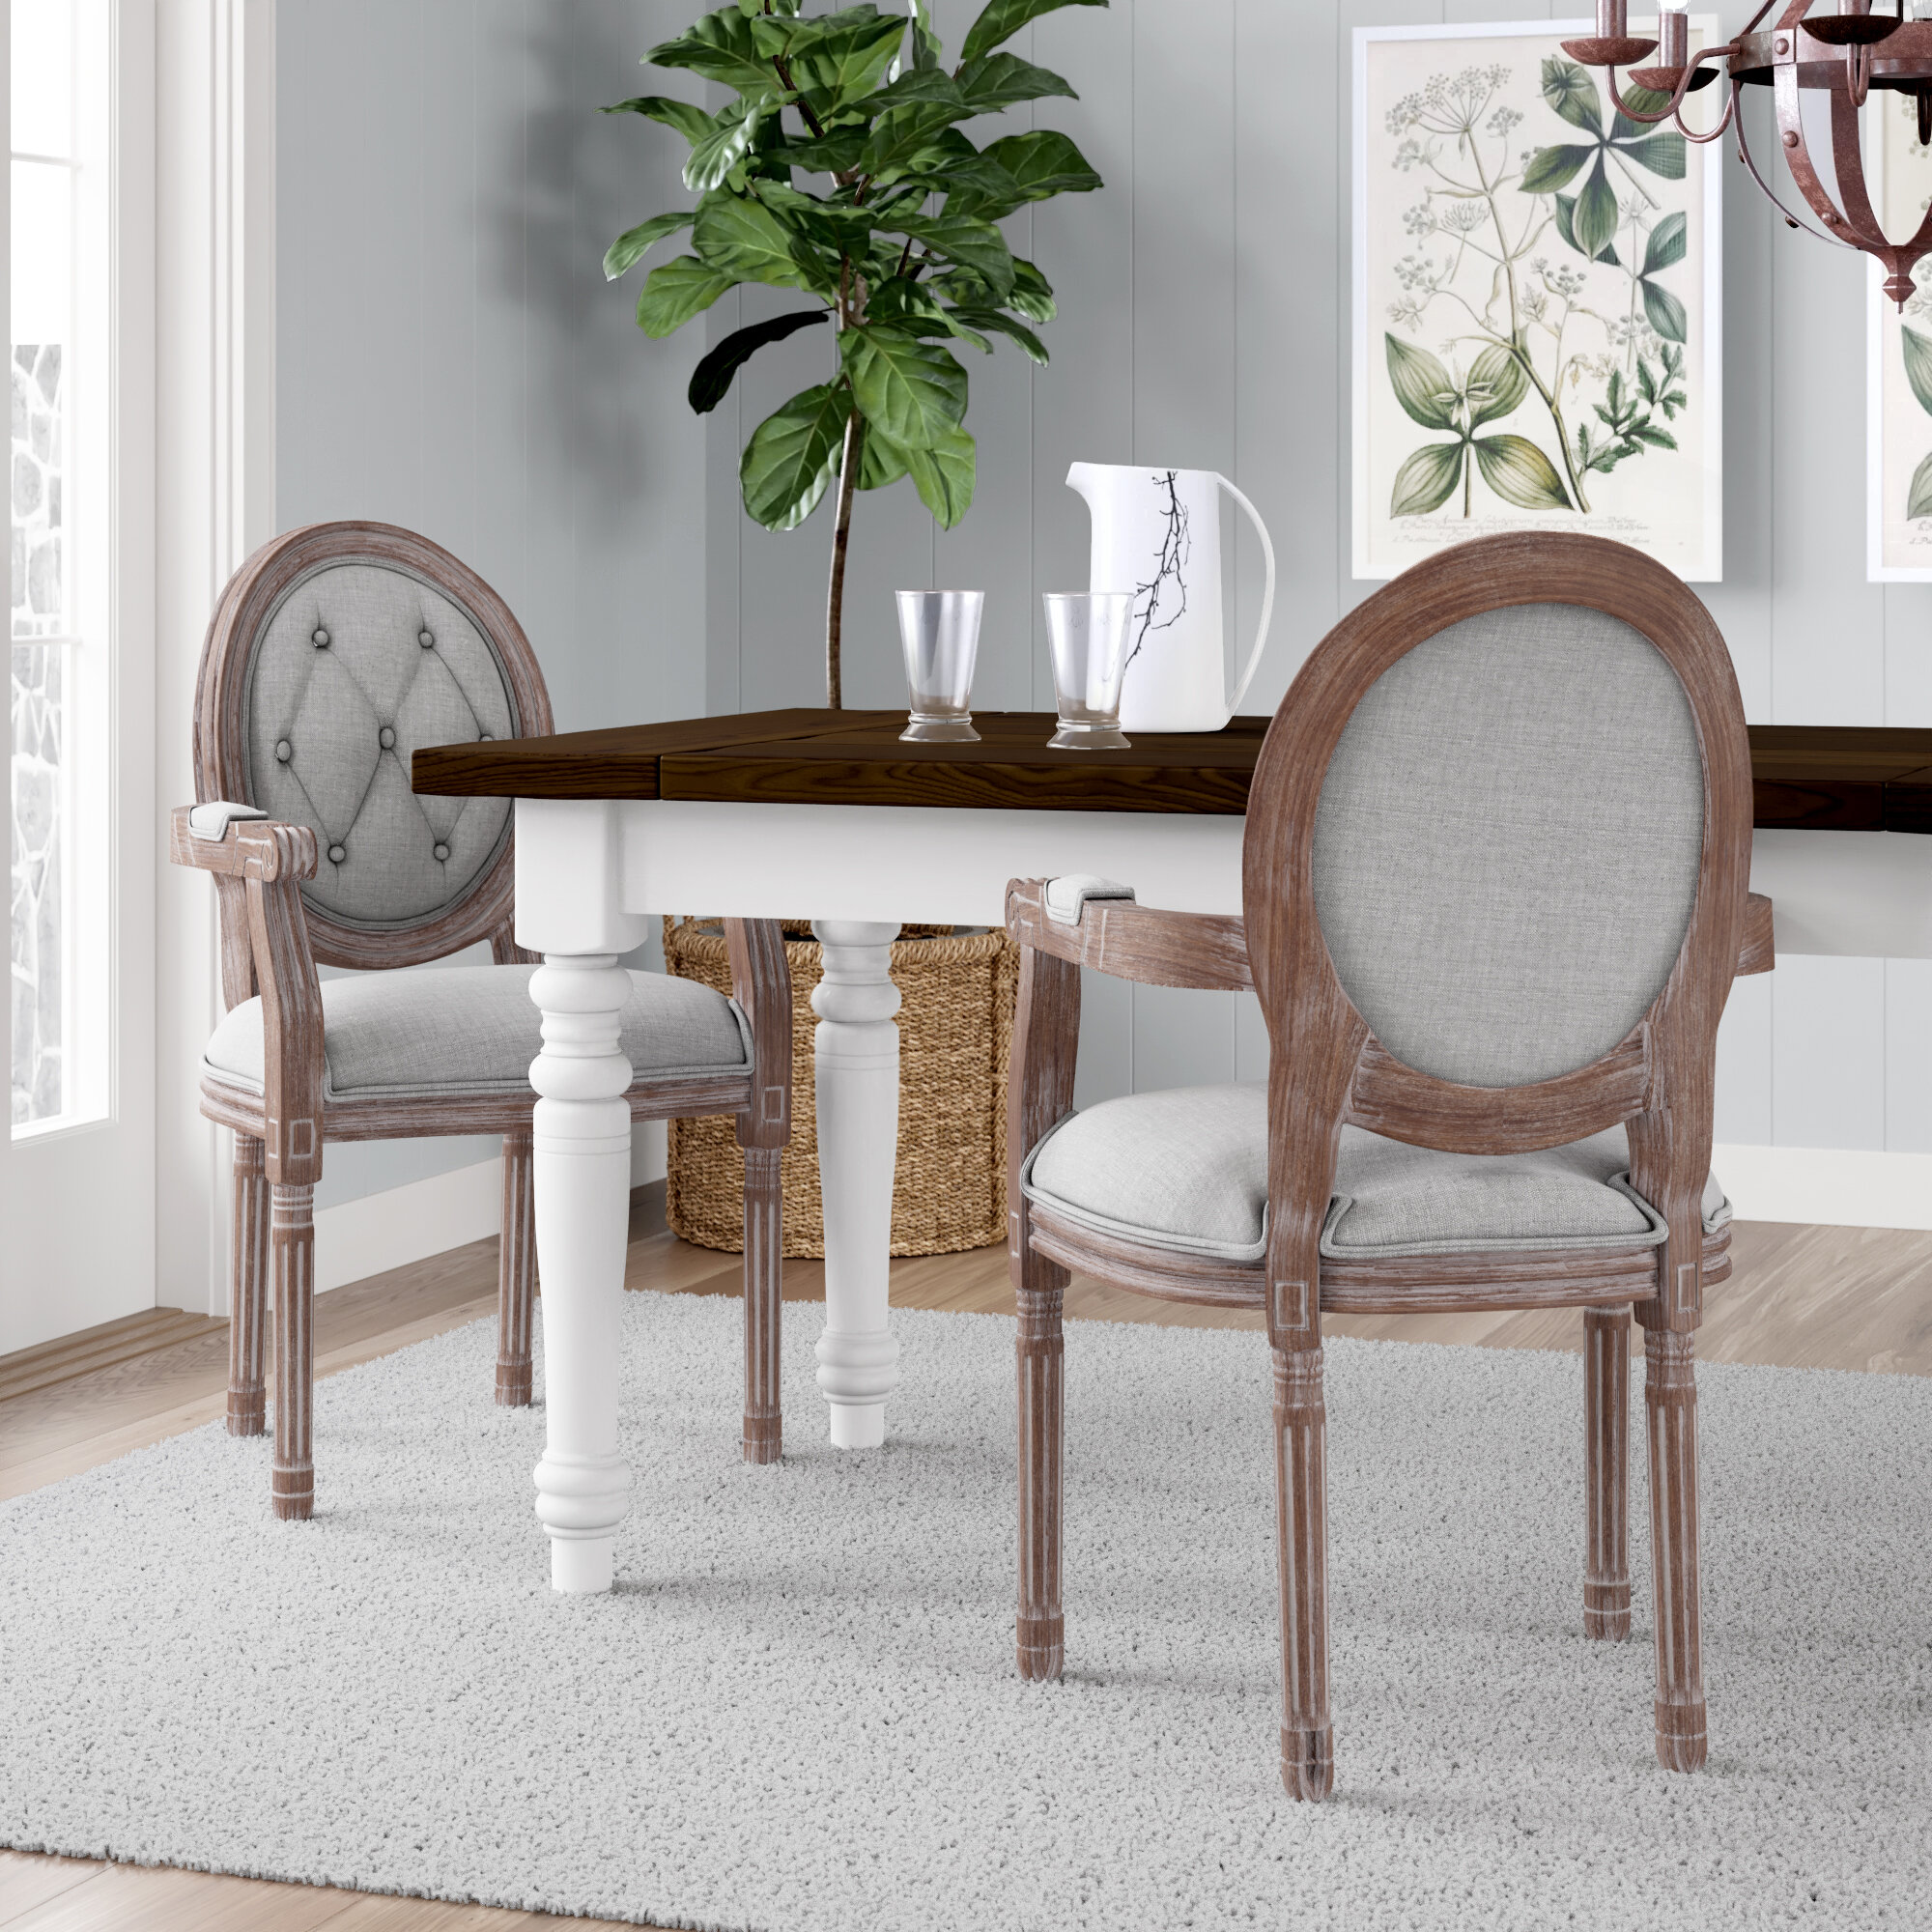 Antique Upholstered Dining Room Chairs - Dining room ideas